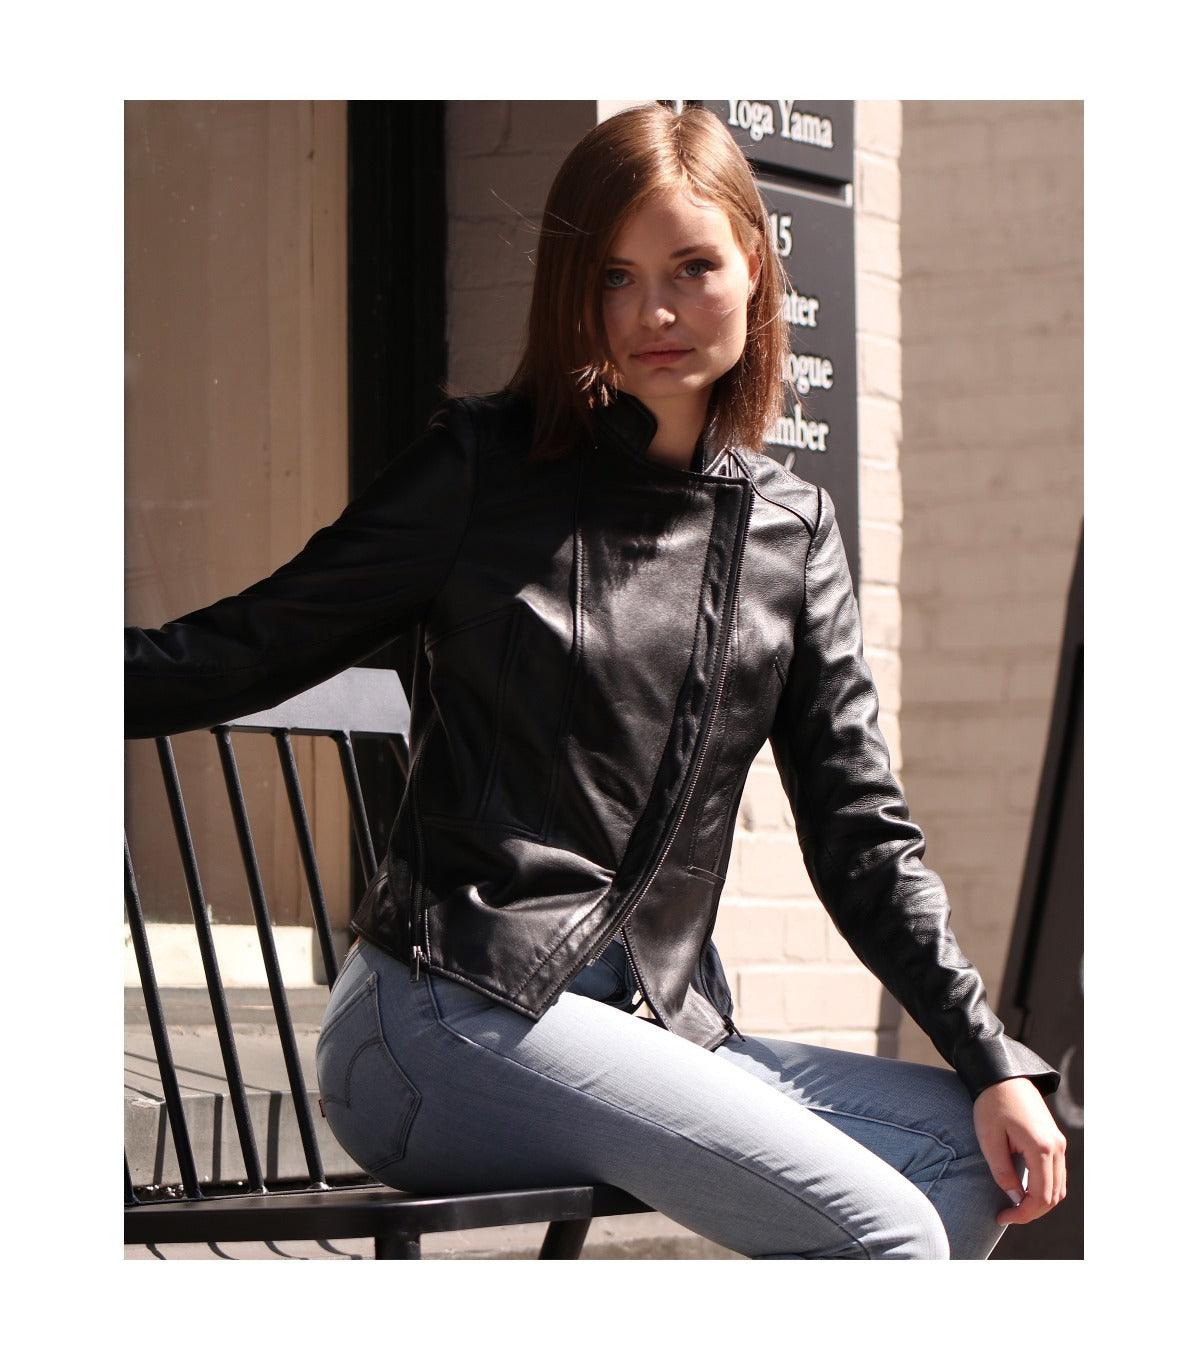 First Manufacturing Zoey - Women's Lambskin Leather Jacket - American Legend Rider